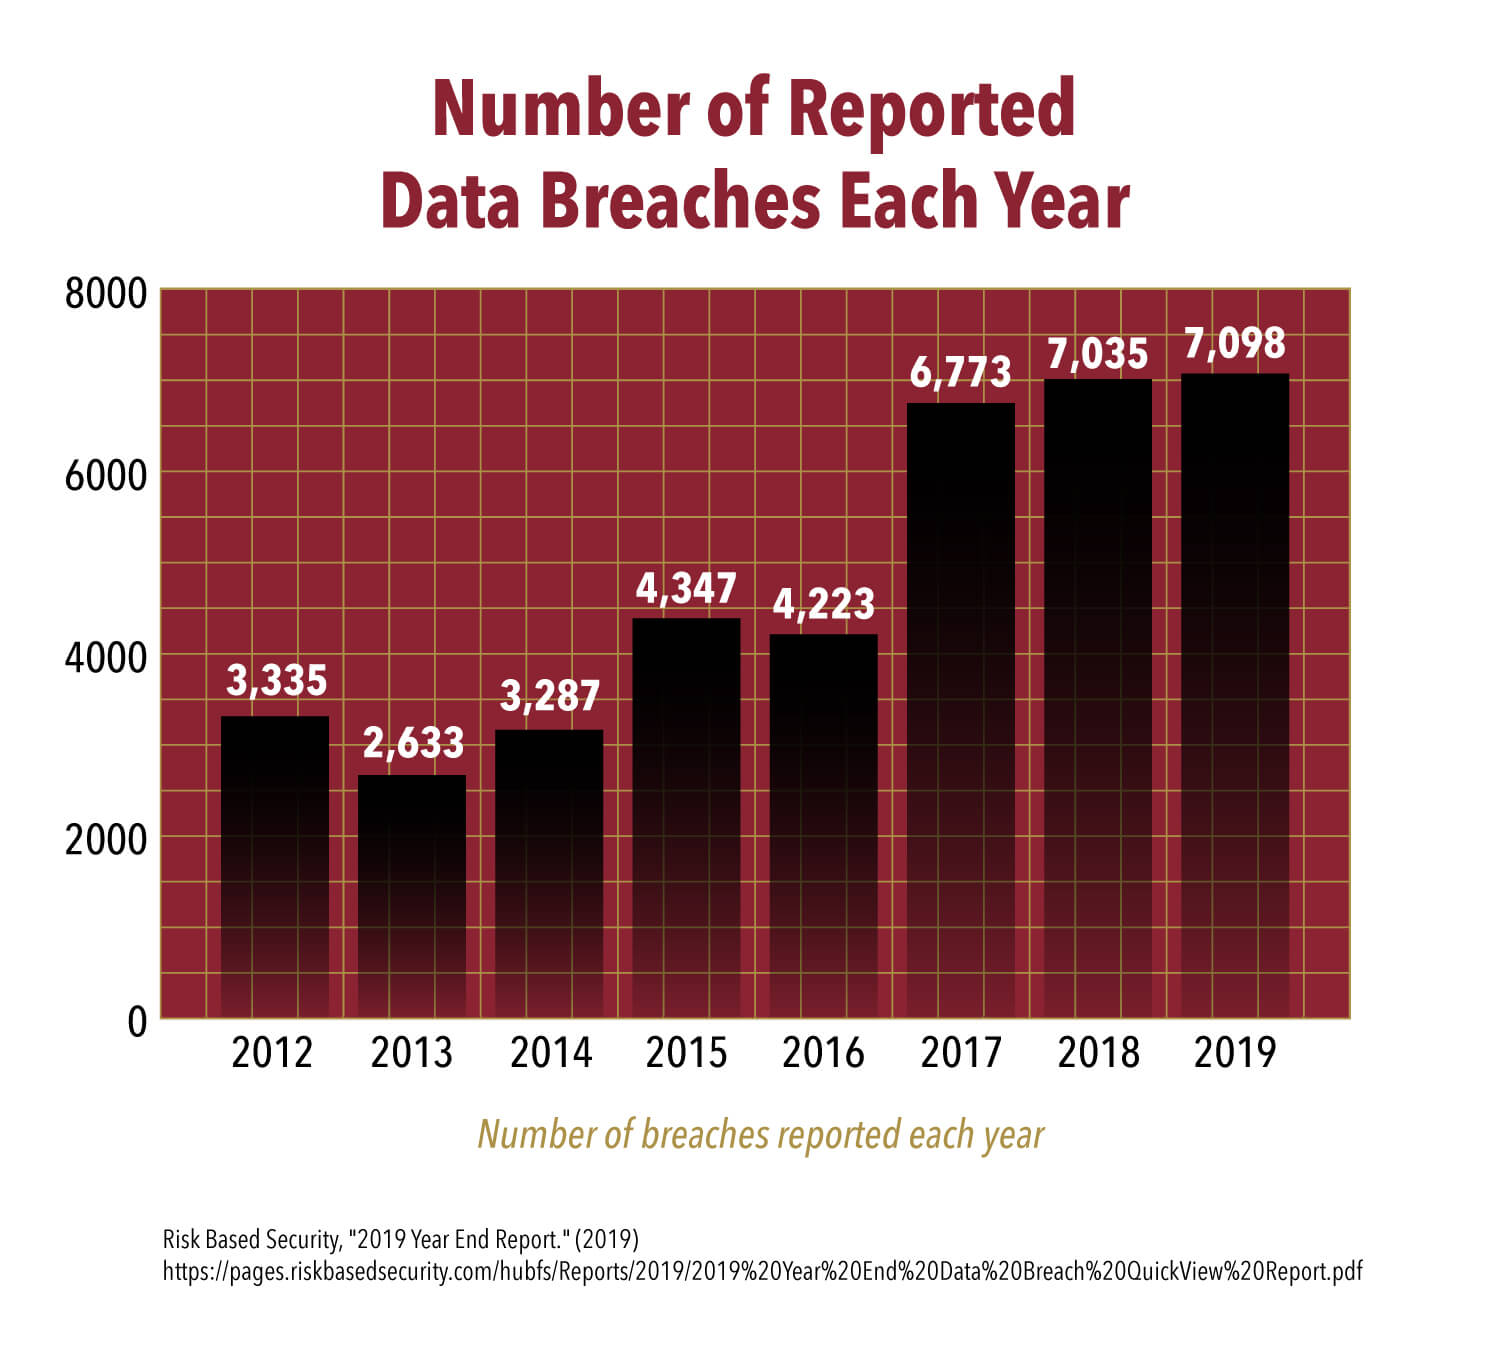 Charts showing number of reported data breaches and lost records each year